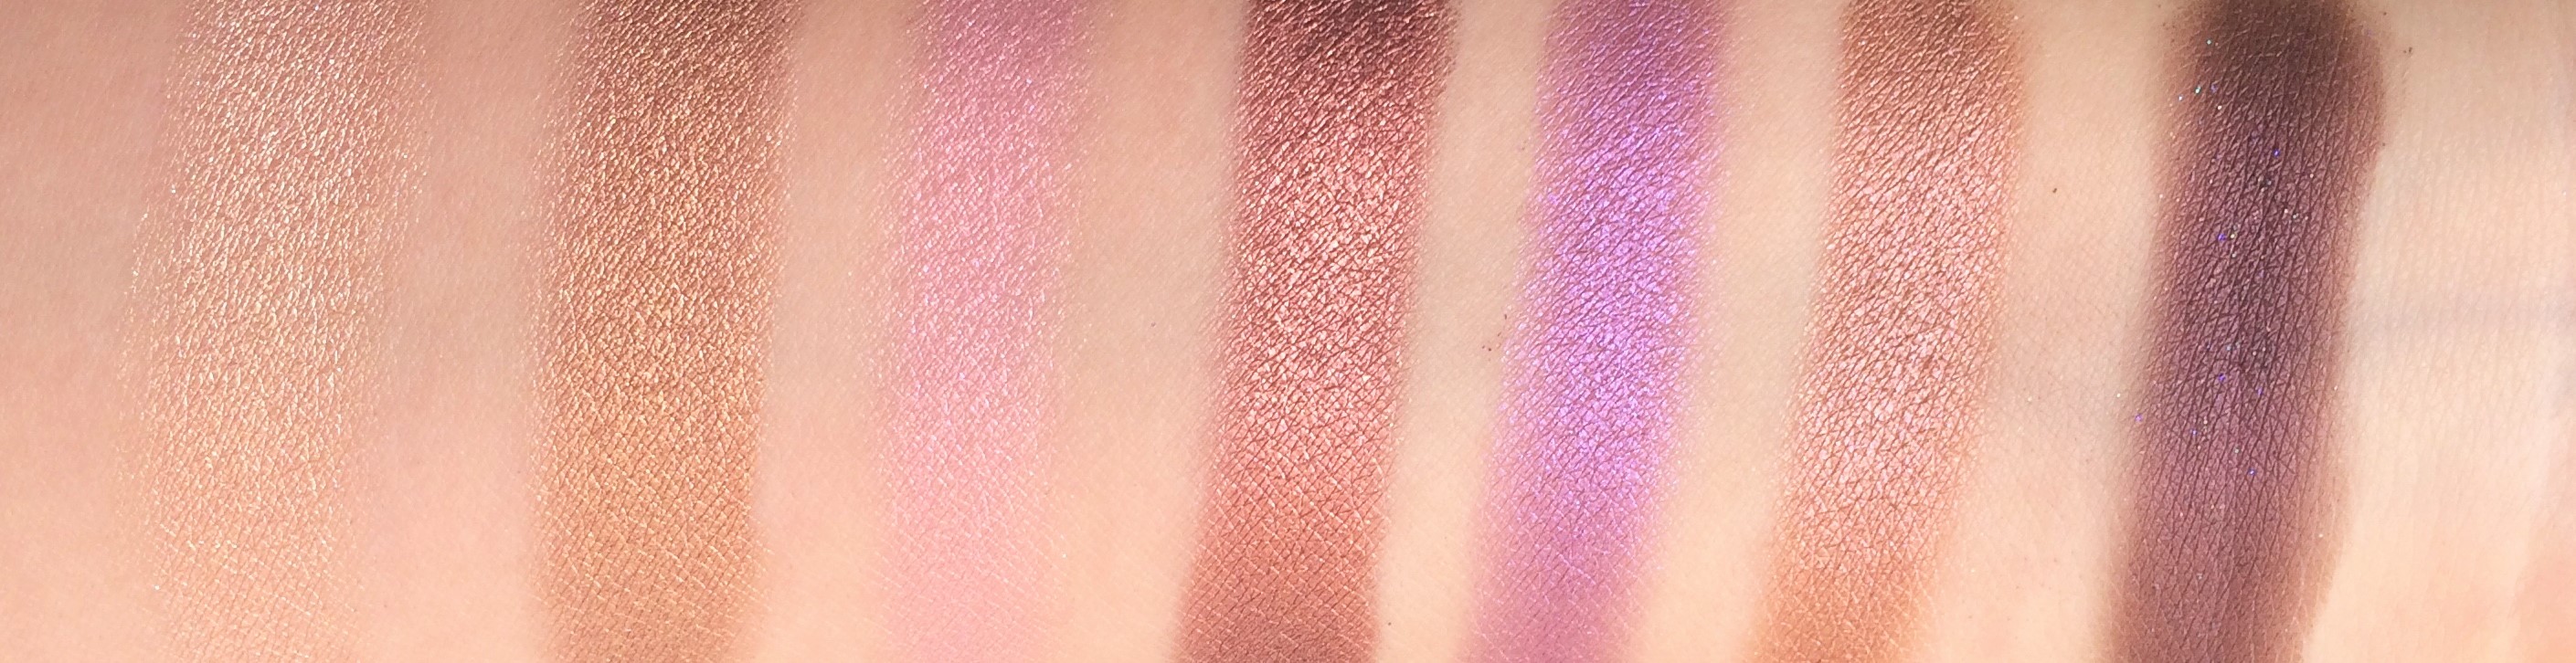 Review Anastasia Beverly Hills Norvina Palette (11)